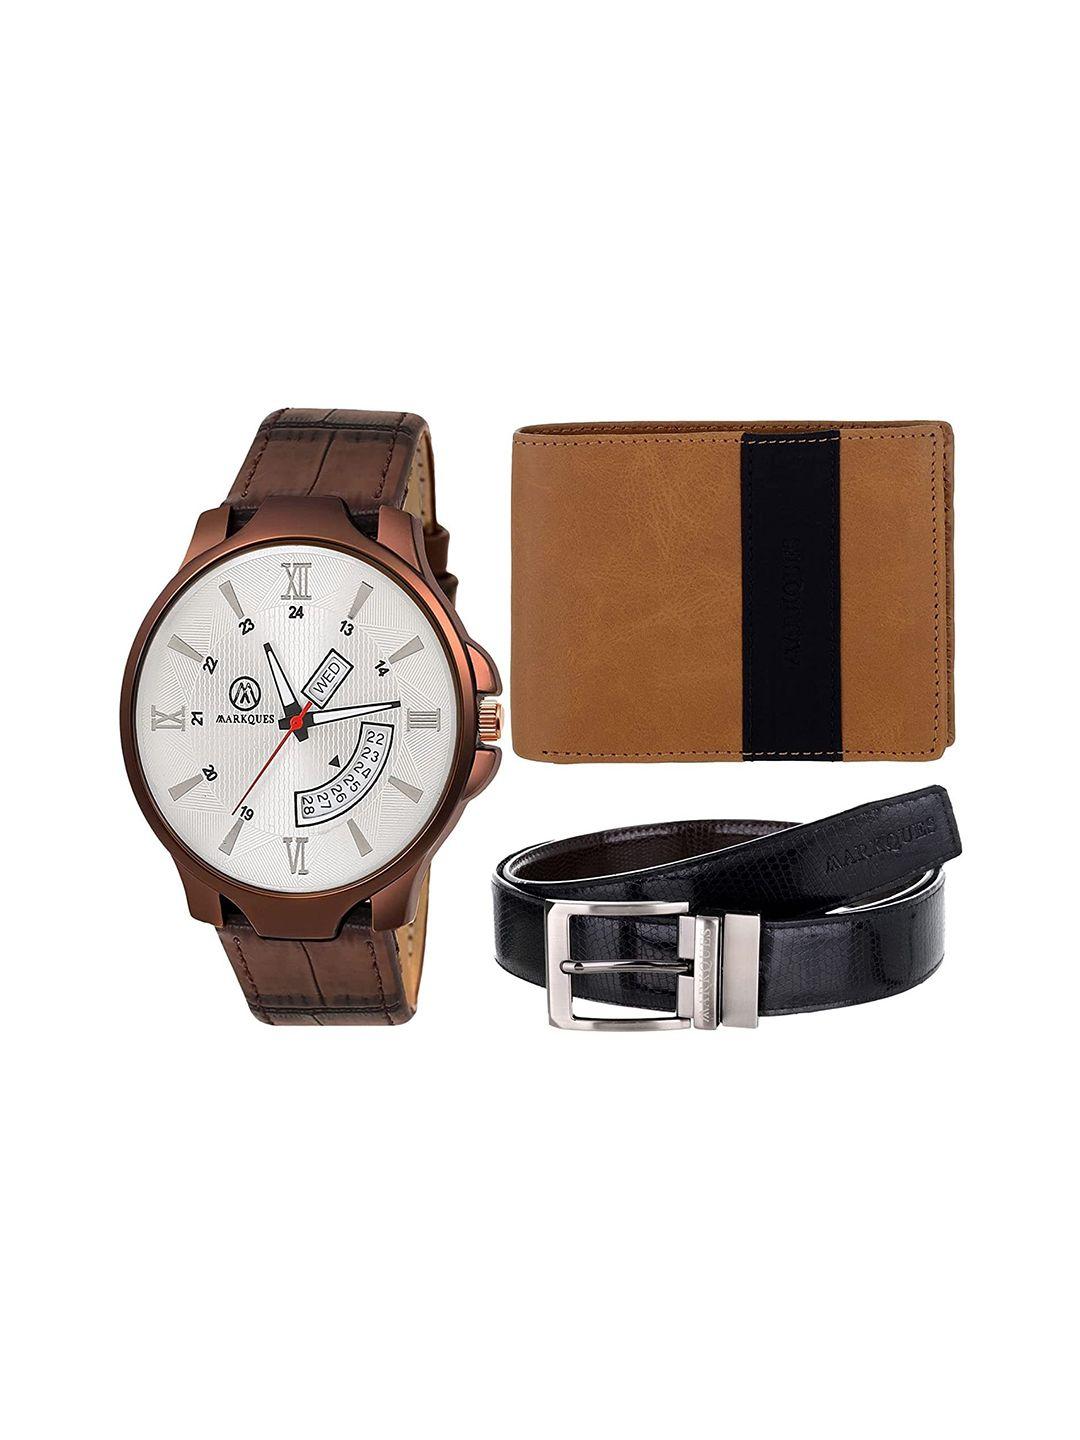 markques men brown  watch, wallet and belt combo gift set accessory gift set